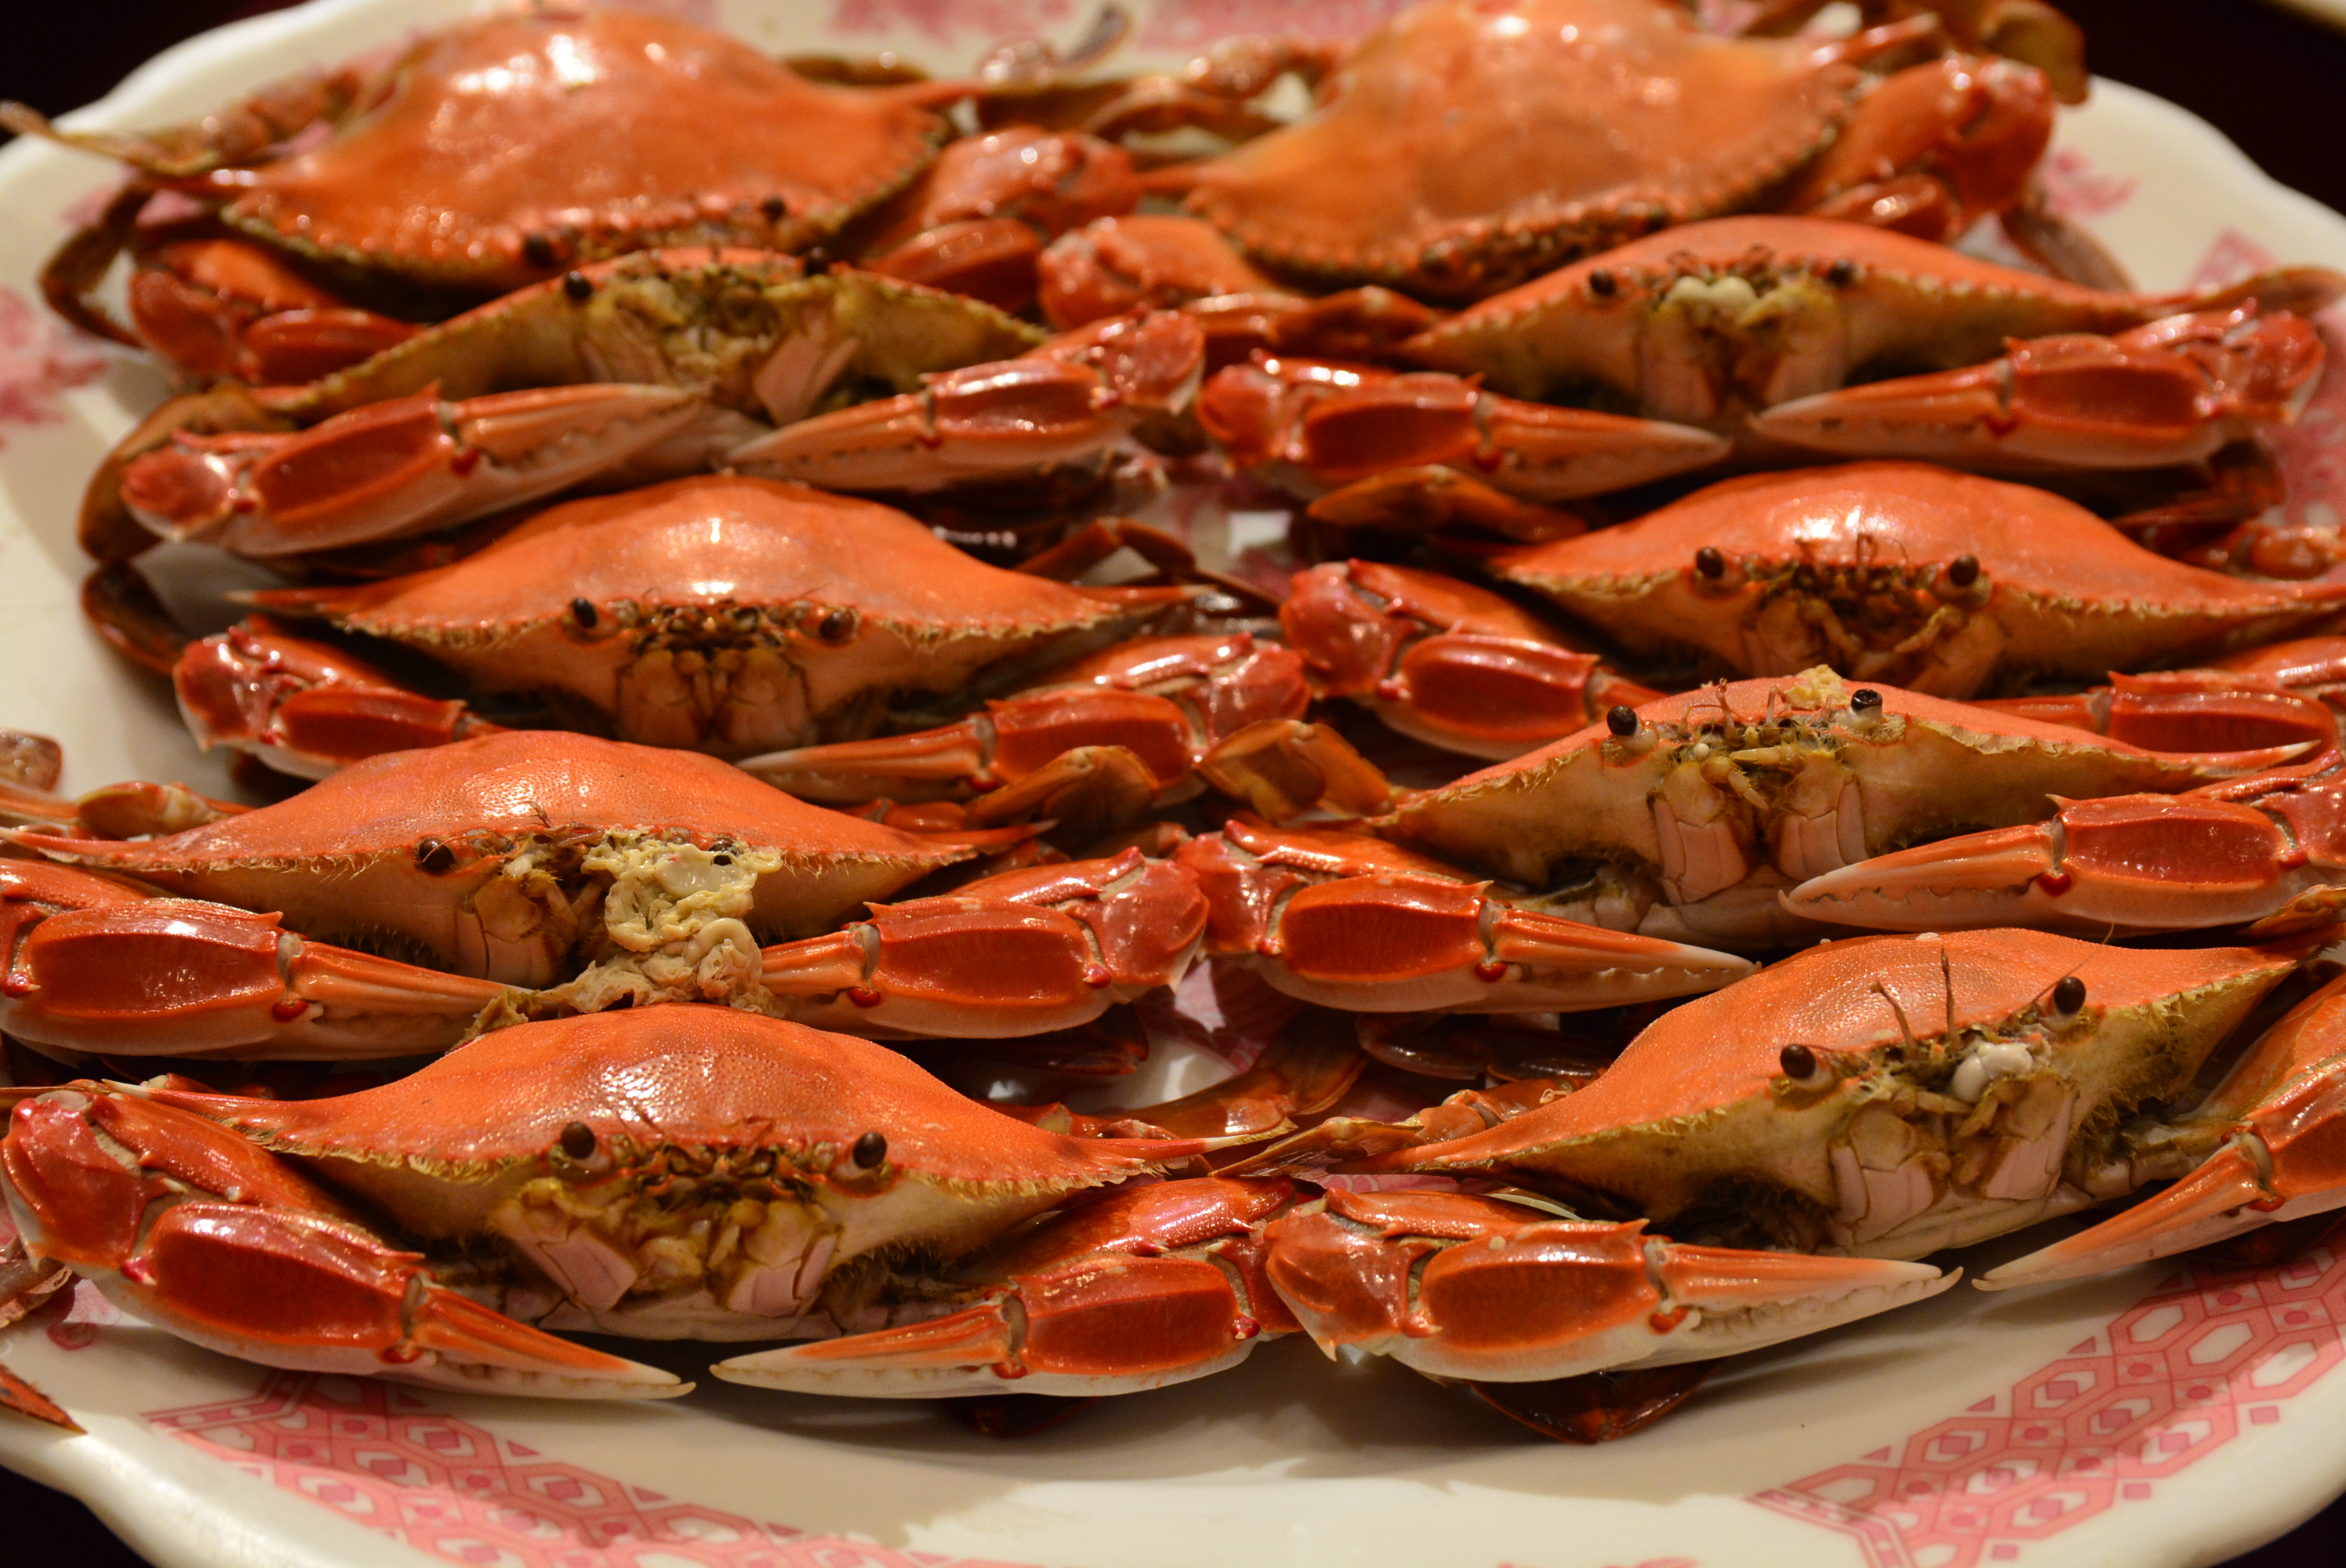 Steamed Wanli crab (three-spotted crabs)